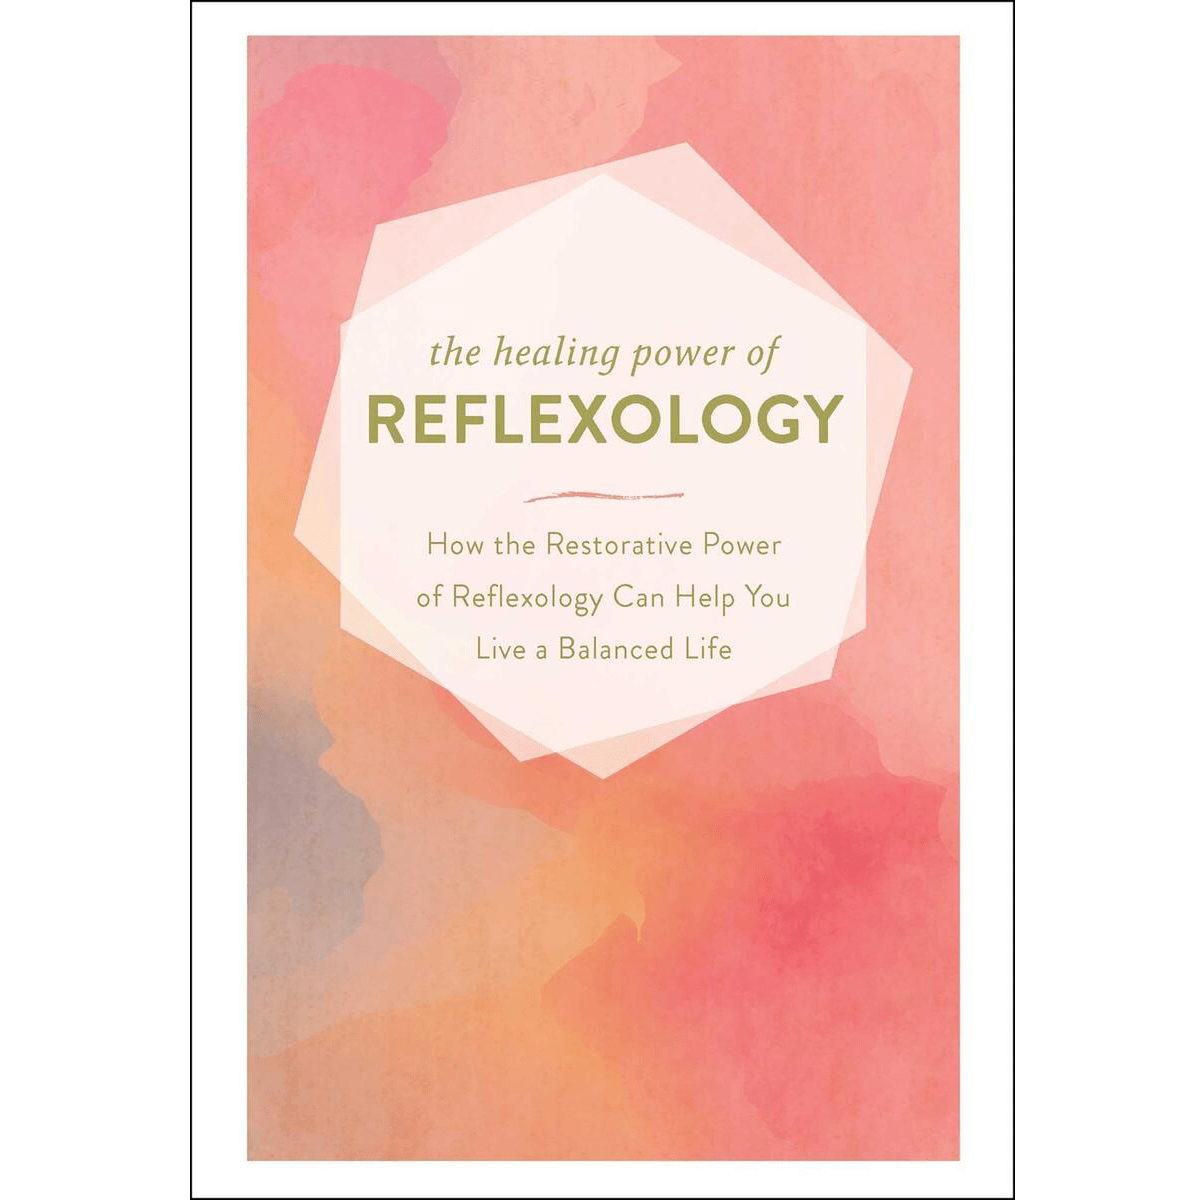 The Healing Power of Reflexology: How the Restorative Power of Reflexology Can Help You Live a Balanced Life - Spiral Circle